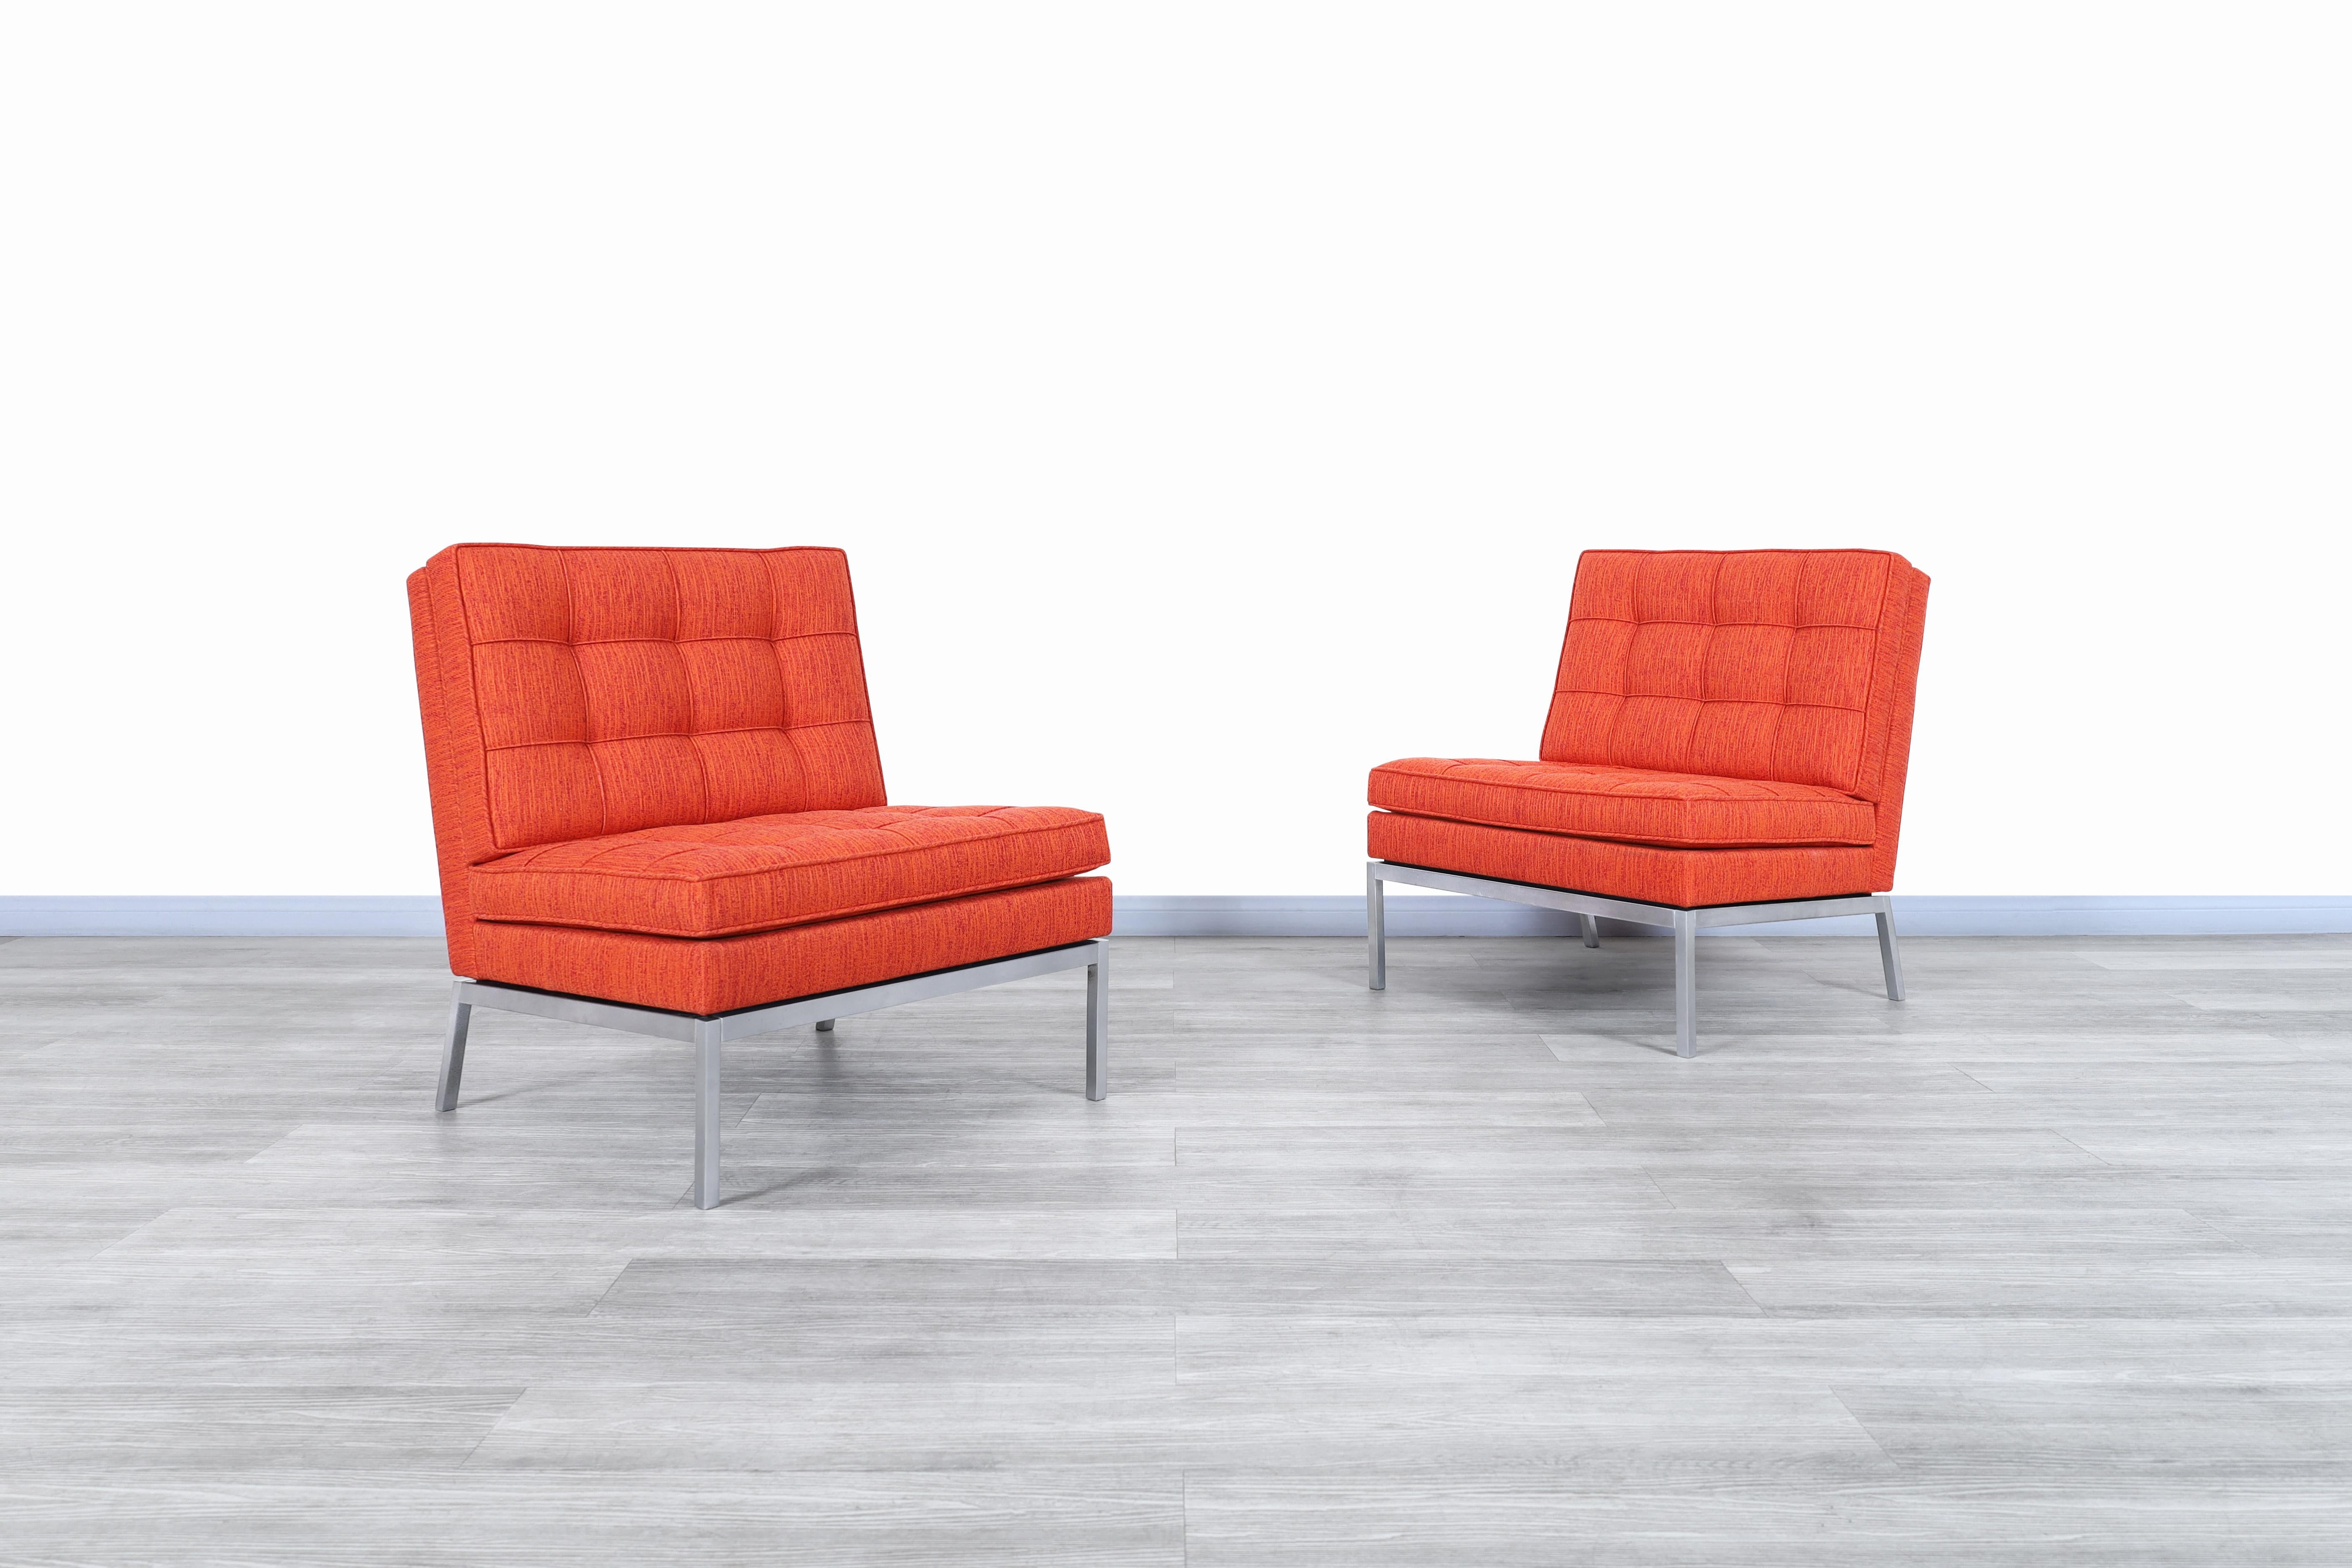 Stunning vintage lounge chairs designed by Florence Knoll for Knoll Associates, Inc. in the United States, circa 1960s. This lounge chairs have a clean design around its edges and an elegant contrast of colors throughout its design. Features